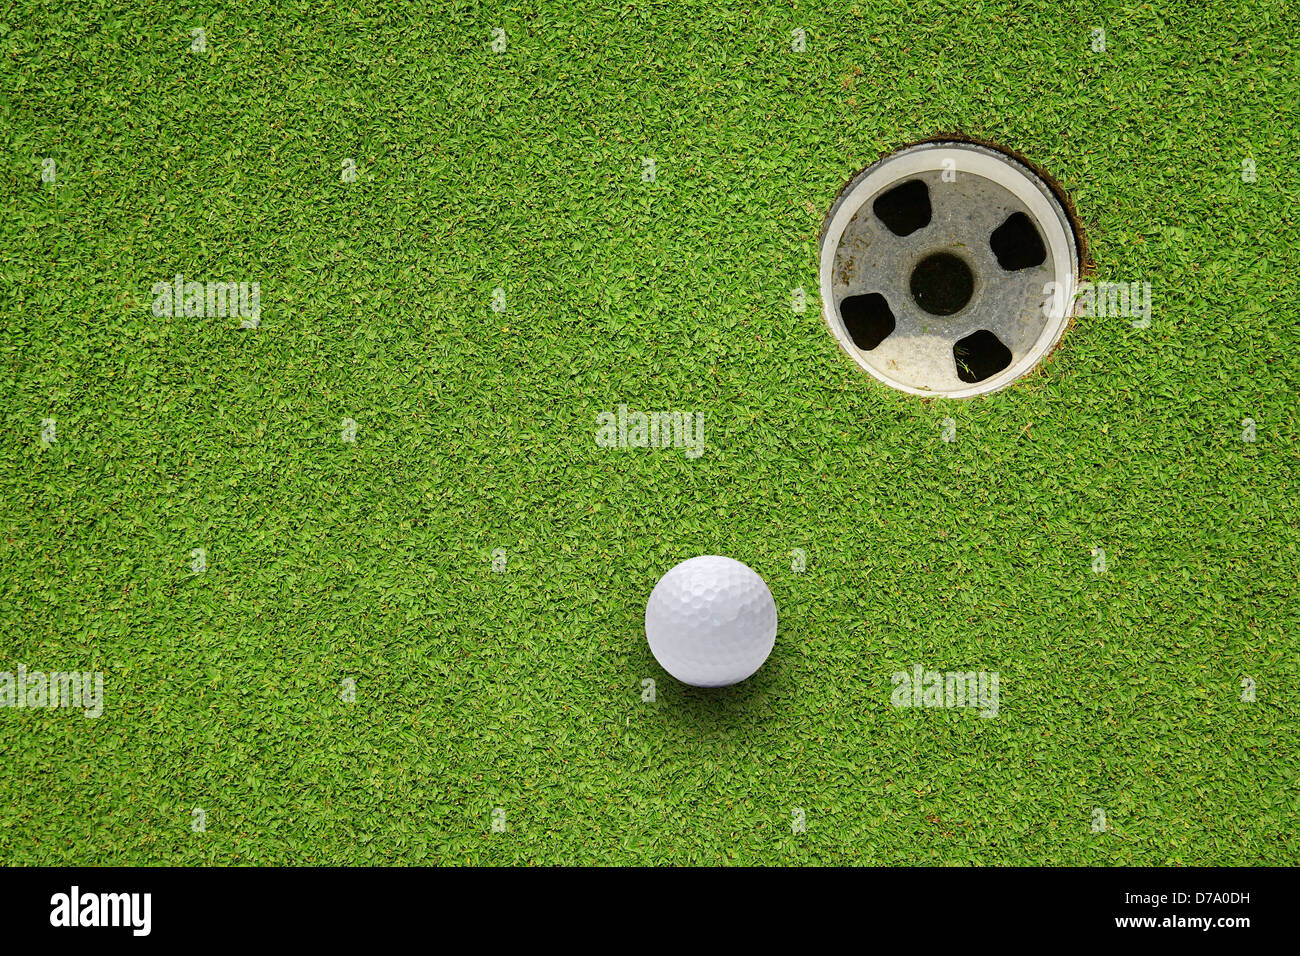 Golf ball very close to the hole Stock Photo